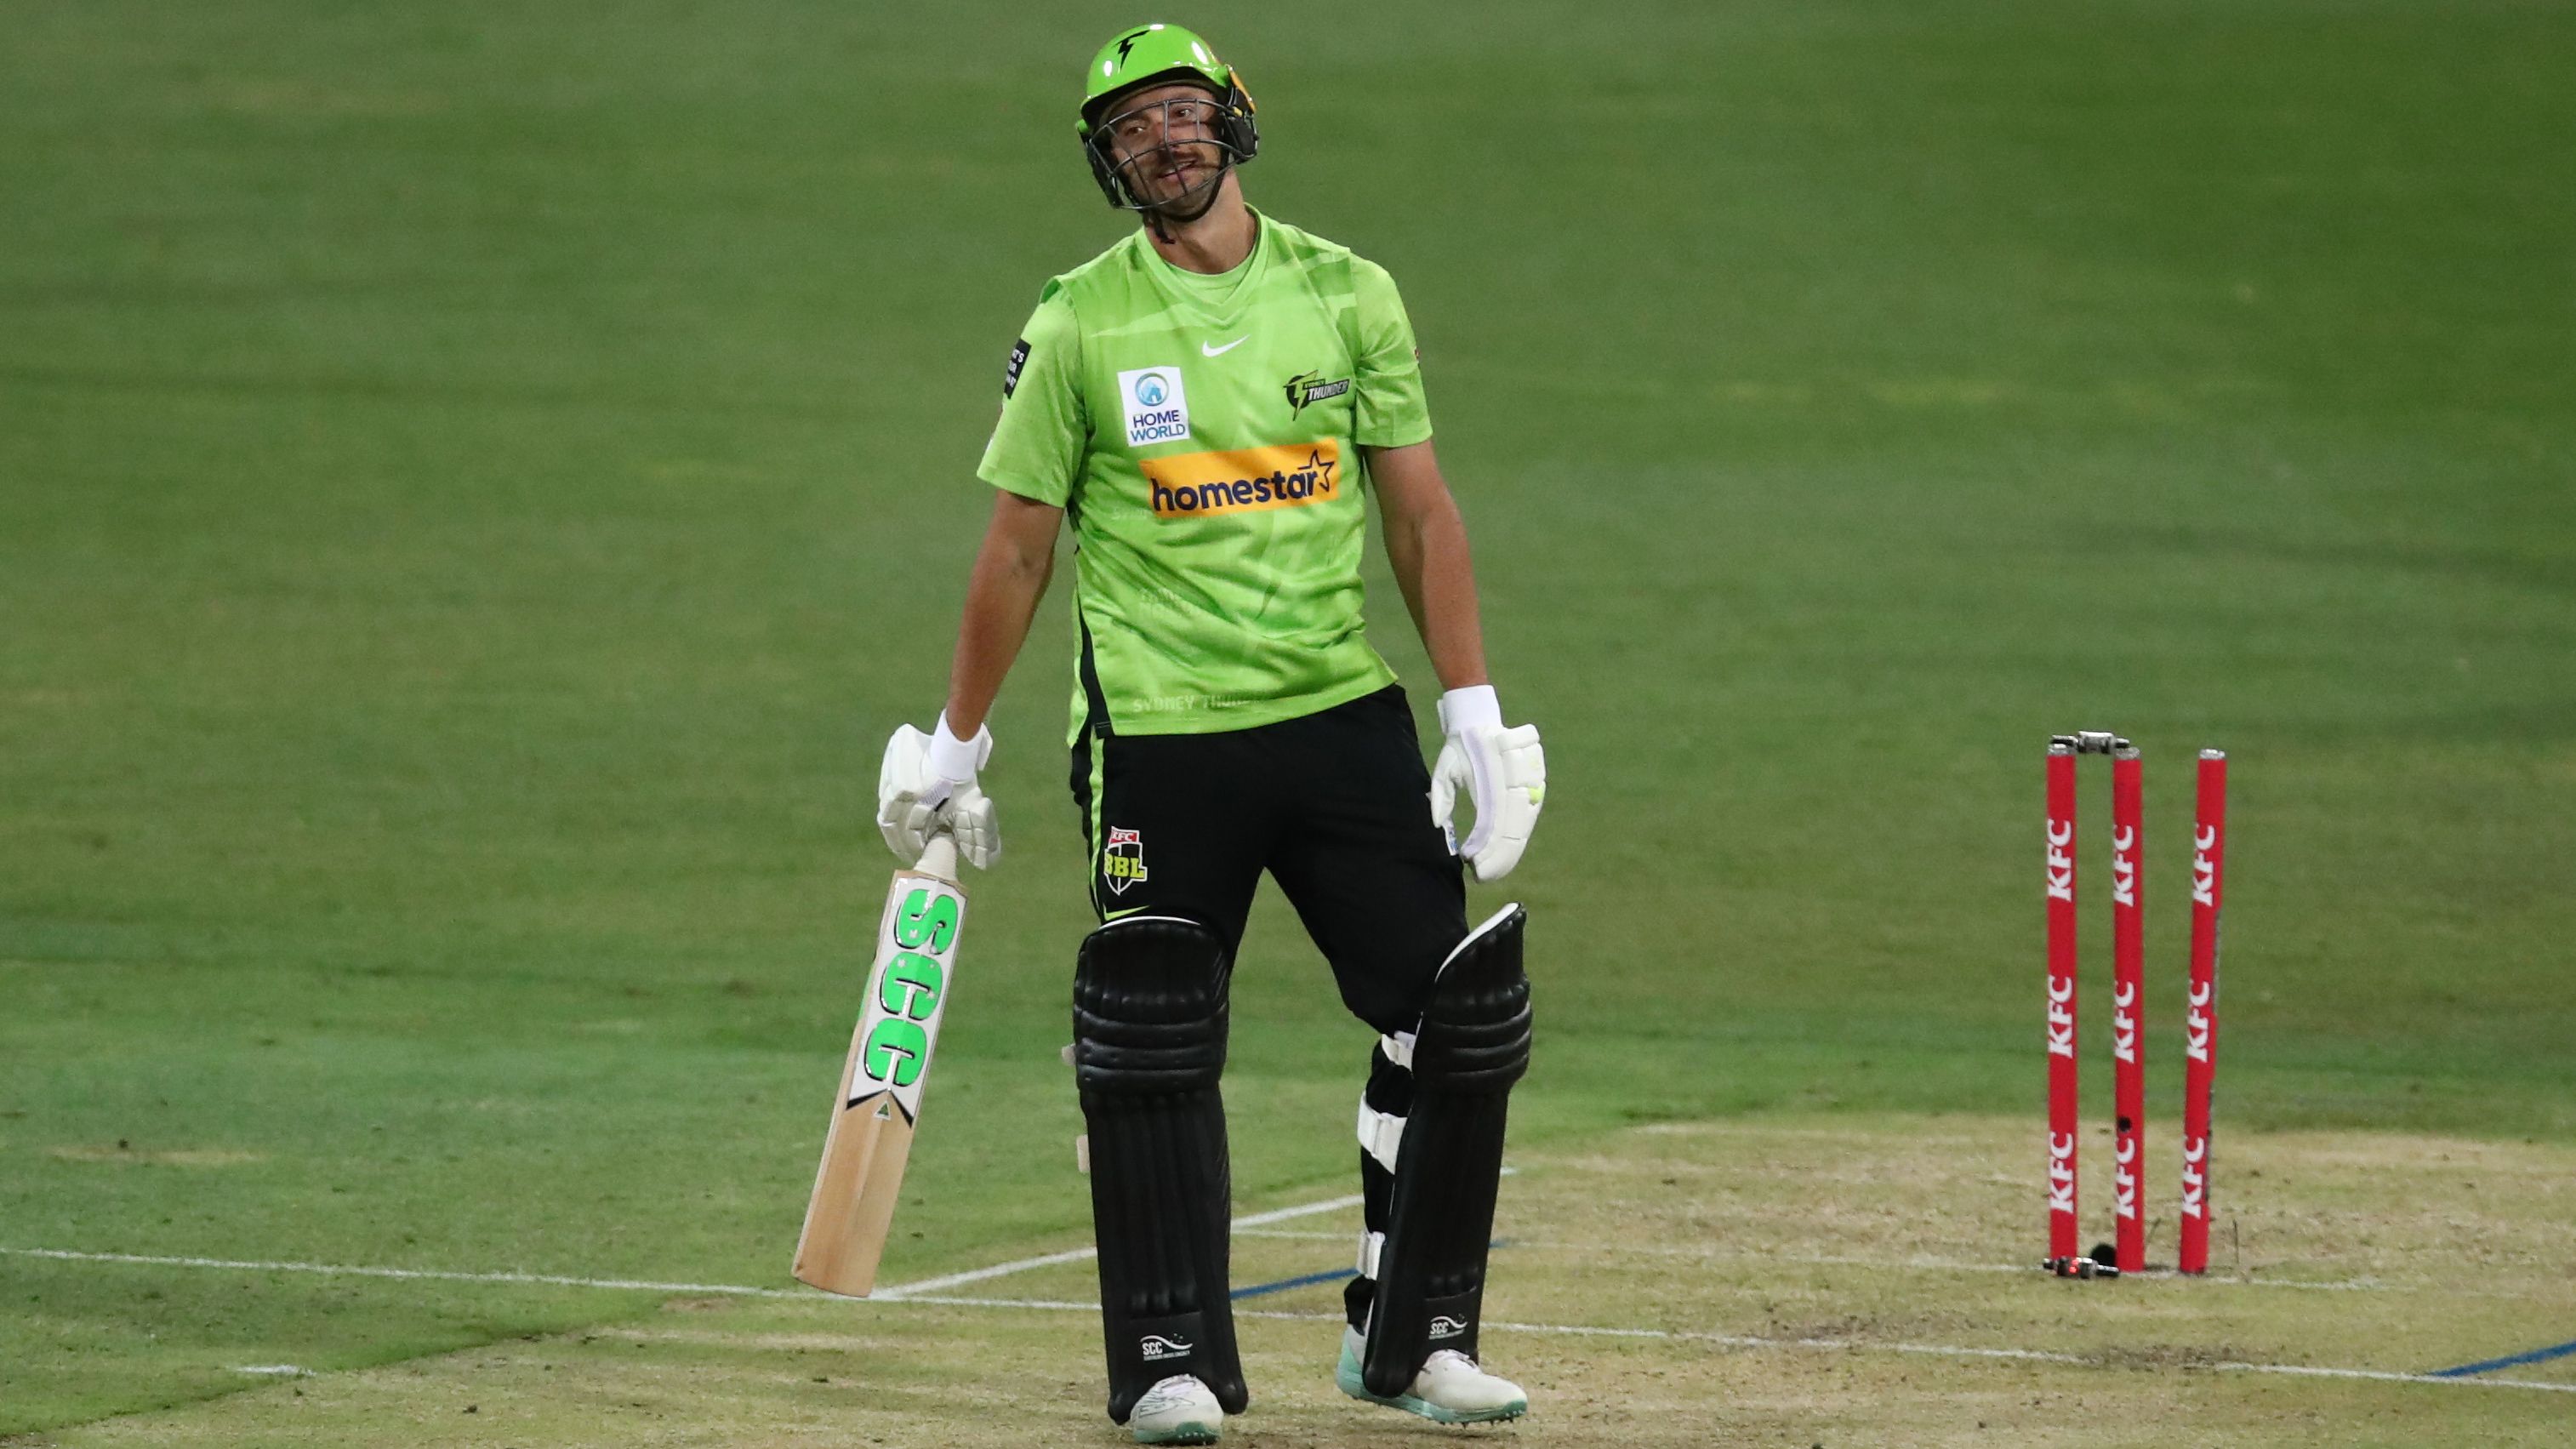 Daniel Sams of the Thunder walks off the field after been dismissed by Wes Agar of the Strikers during the Men&#x27;s Big Bash League match between the Sydney Thunder and the Adelaide Strikers at Sydney Showground Stadium on December 16, 2022 in Sydney, Australia. (Photo by Jason McCawley - CA/Cricket Australia via Getty Images)